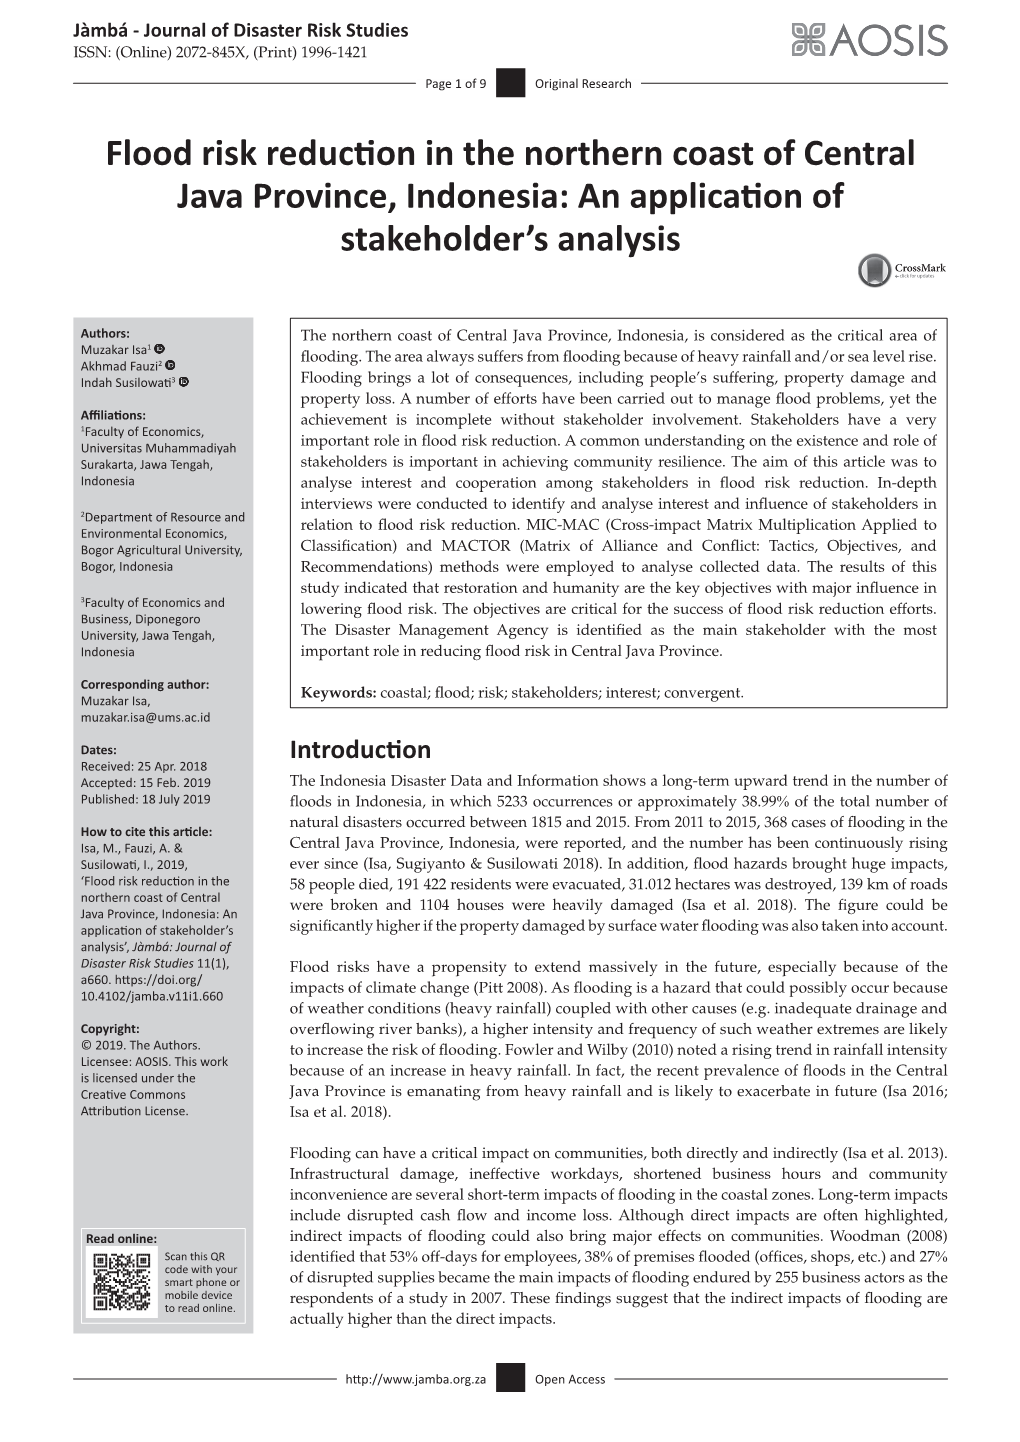 Flood Risk Reduction in the Northern Coast of Central Java Province, Indonesia: an Application of Stakeholder’S Analysis